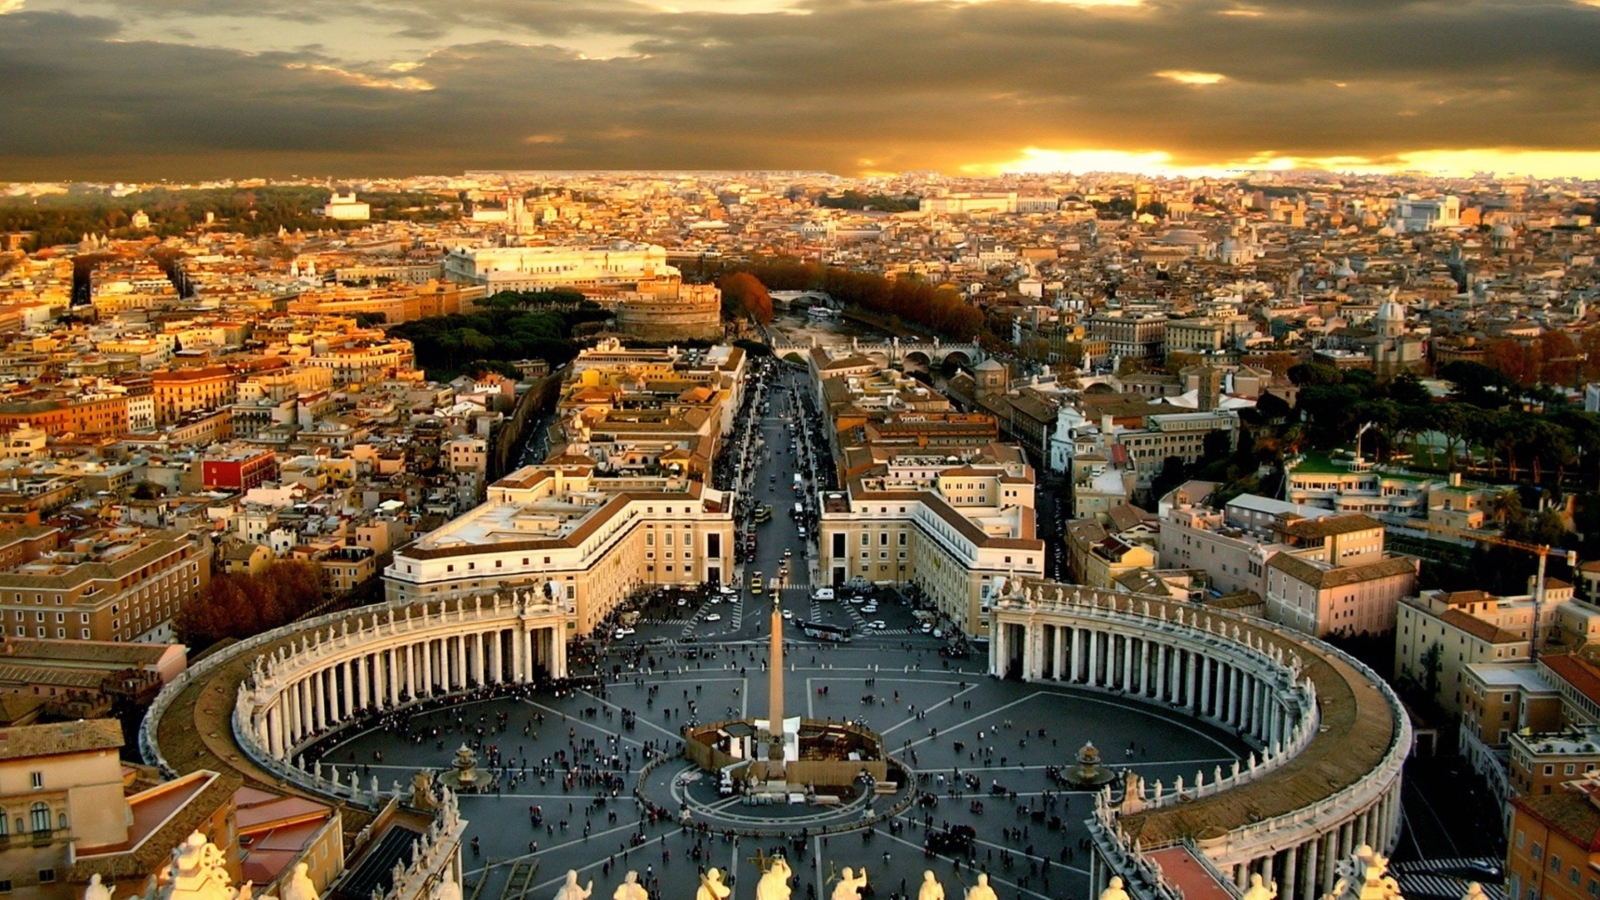 St. Peter's Square in Rome wallpaper 1600x900